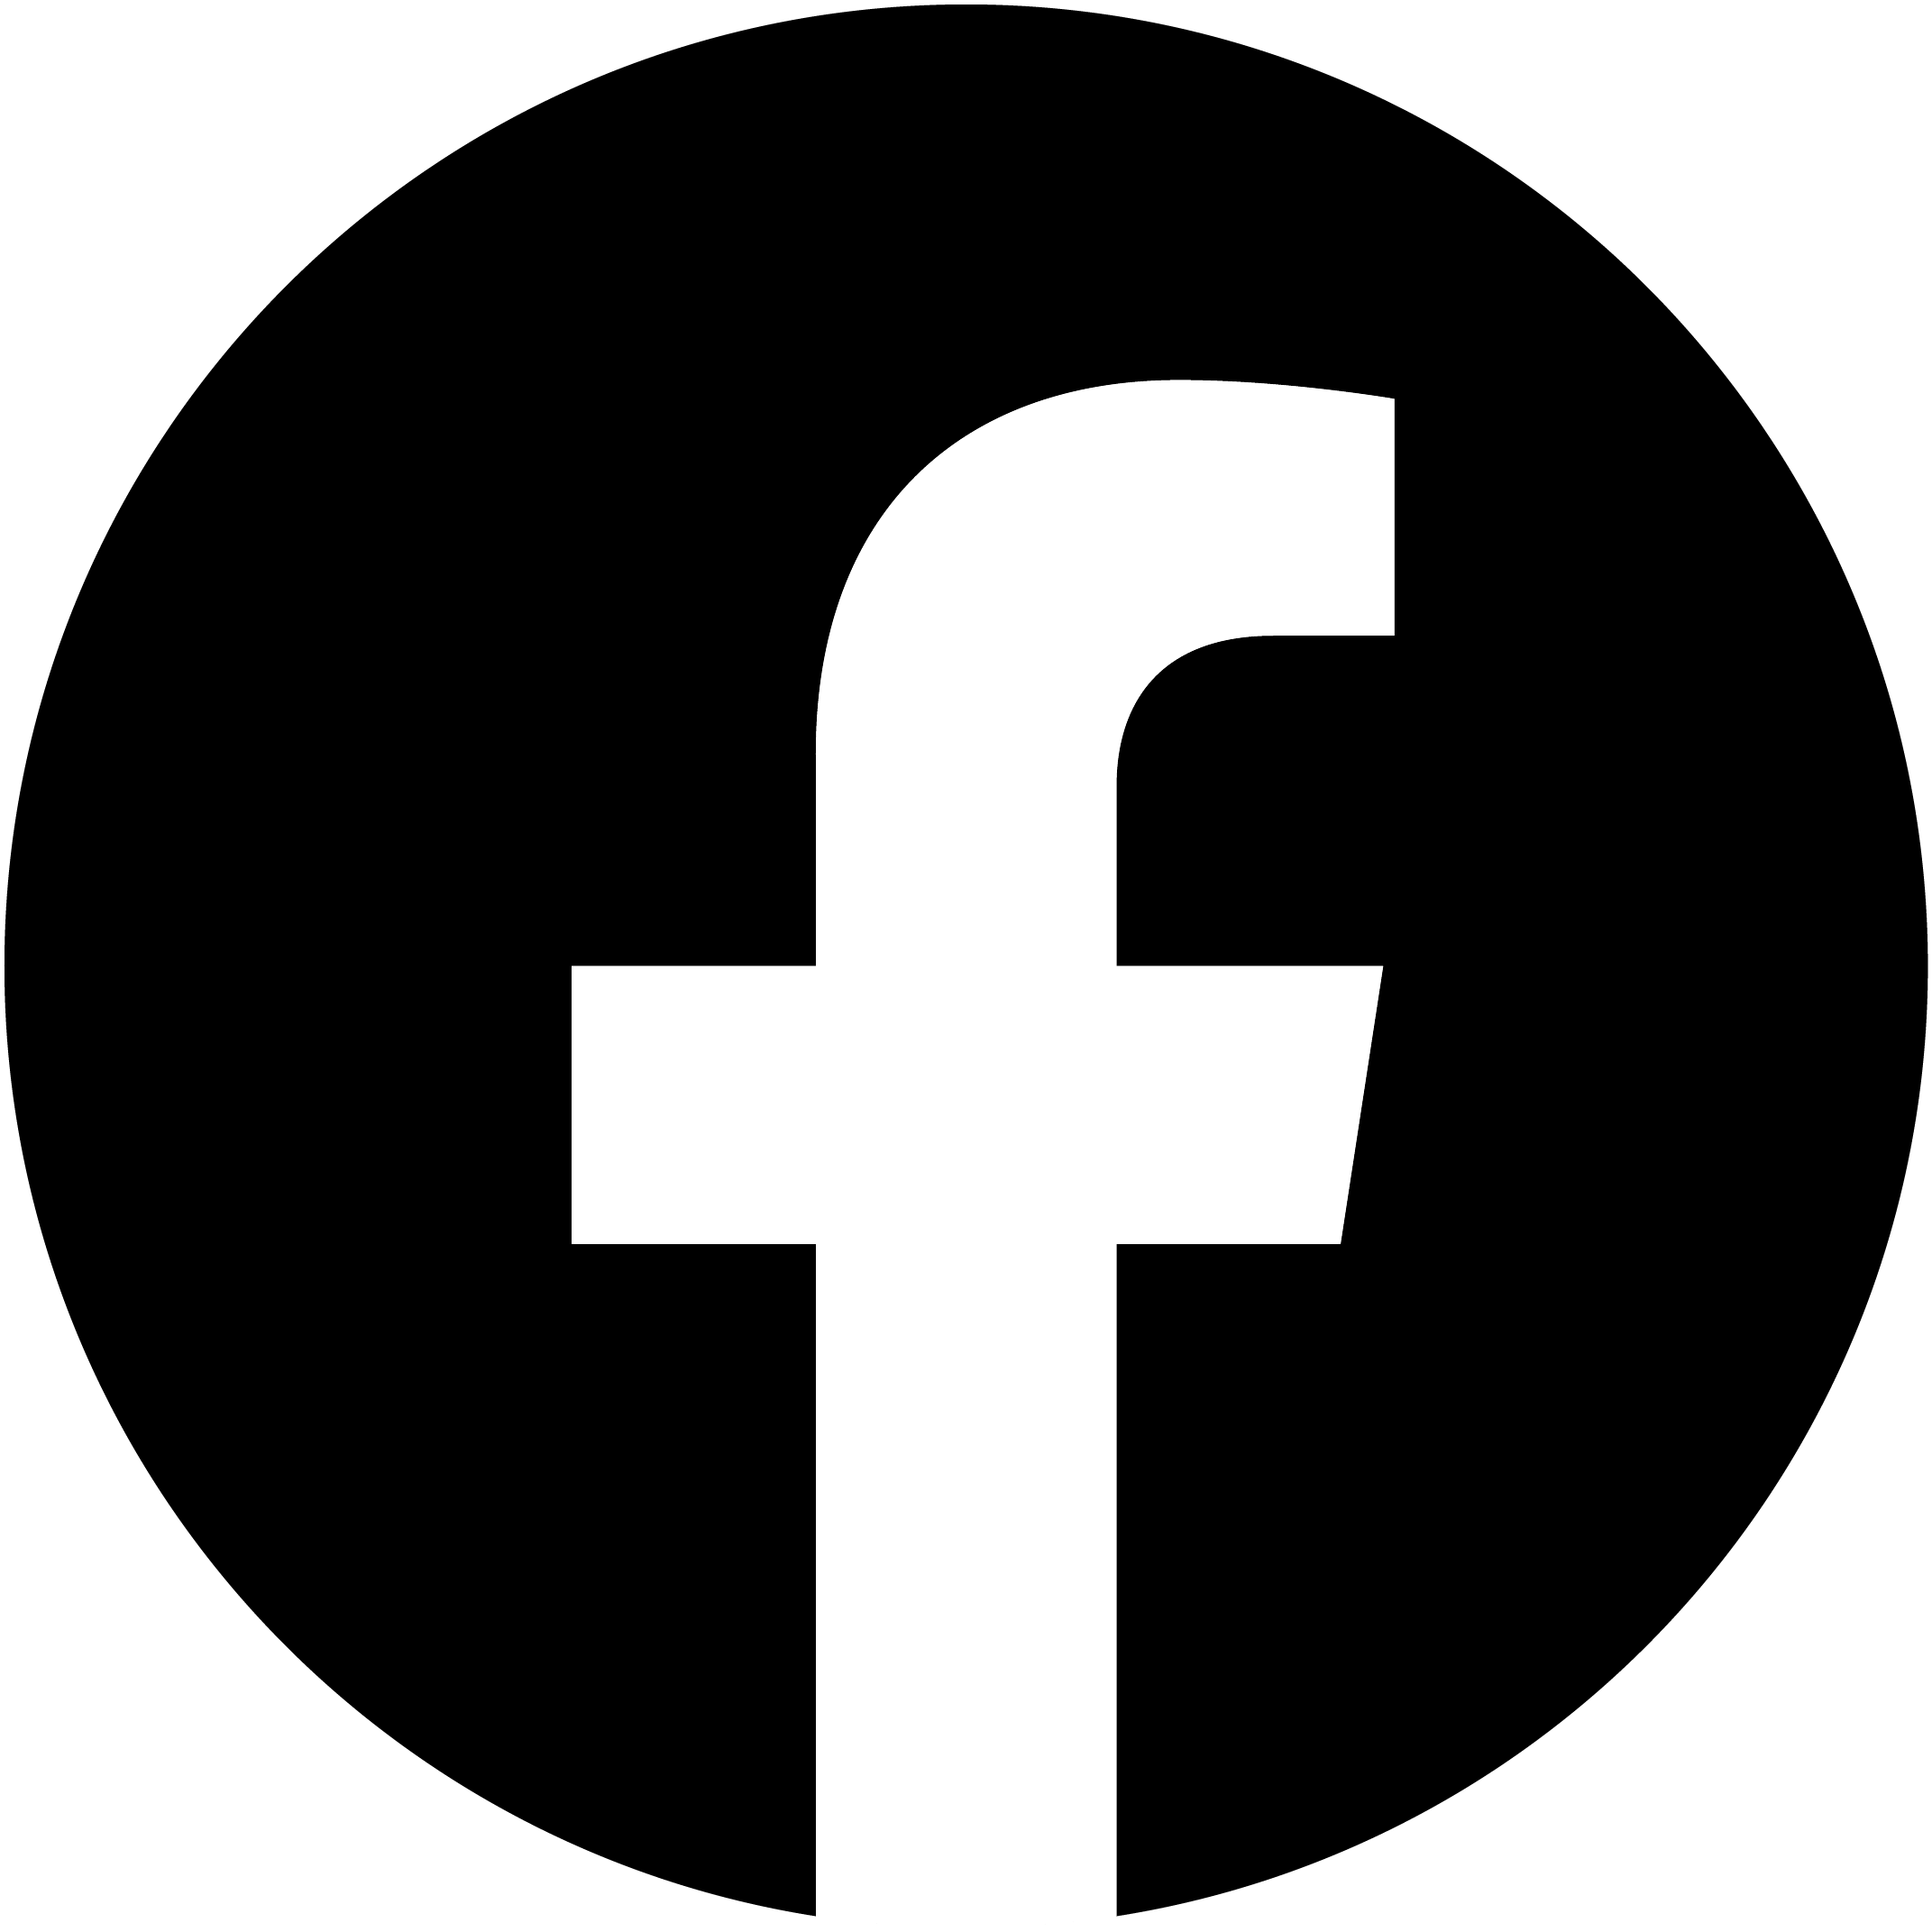 facebook-icon-black-png-large